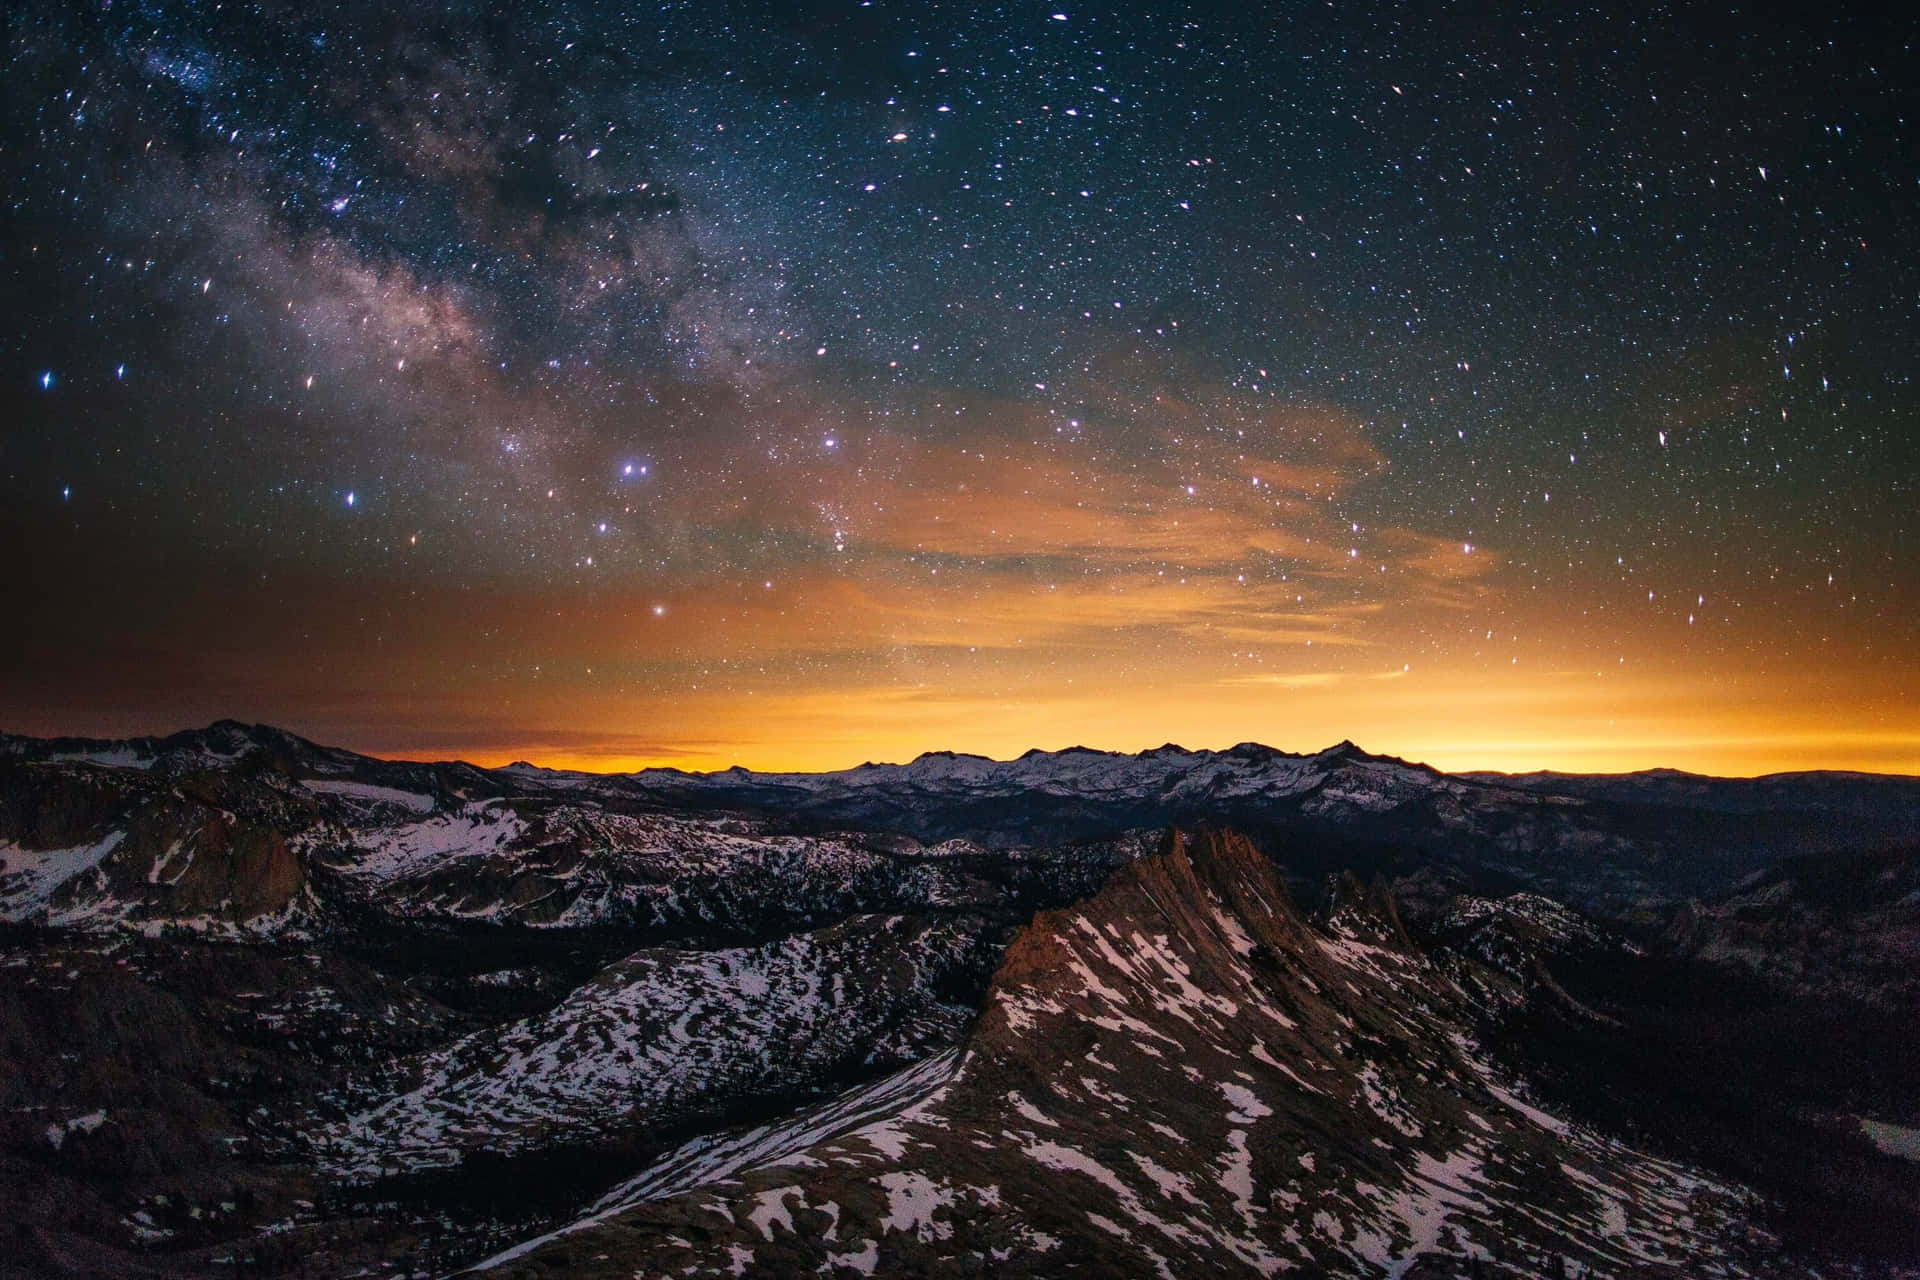 Timeless: A breathtaking awe-inspiring night sky filled with stars